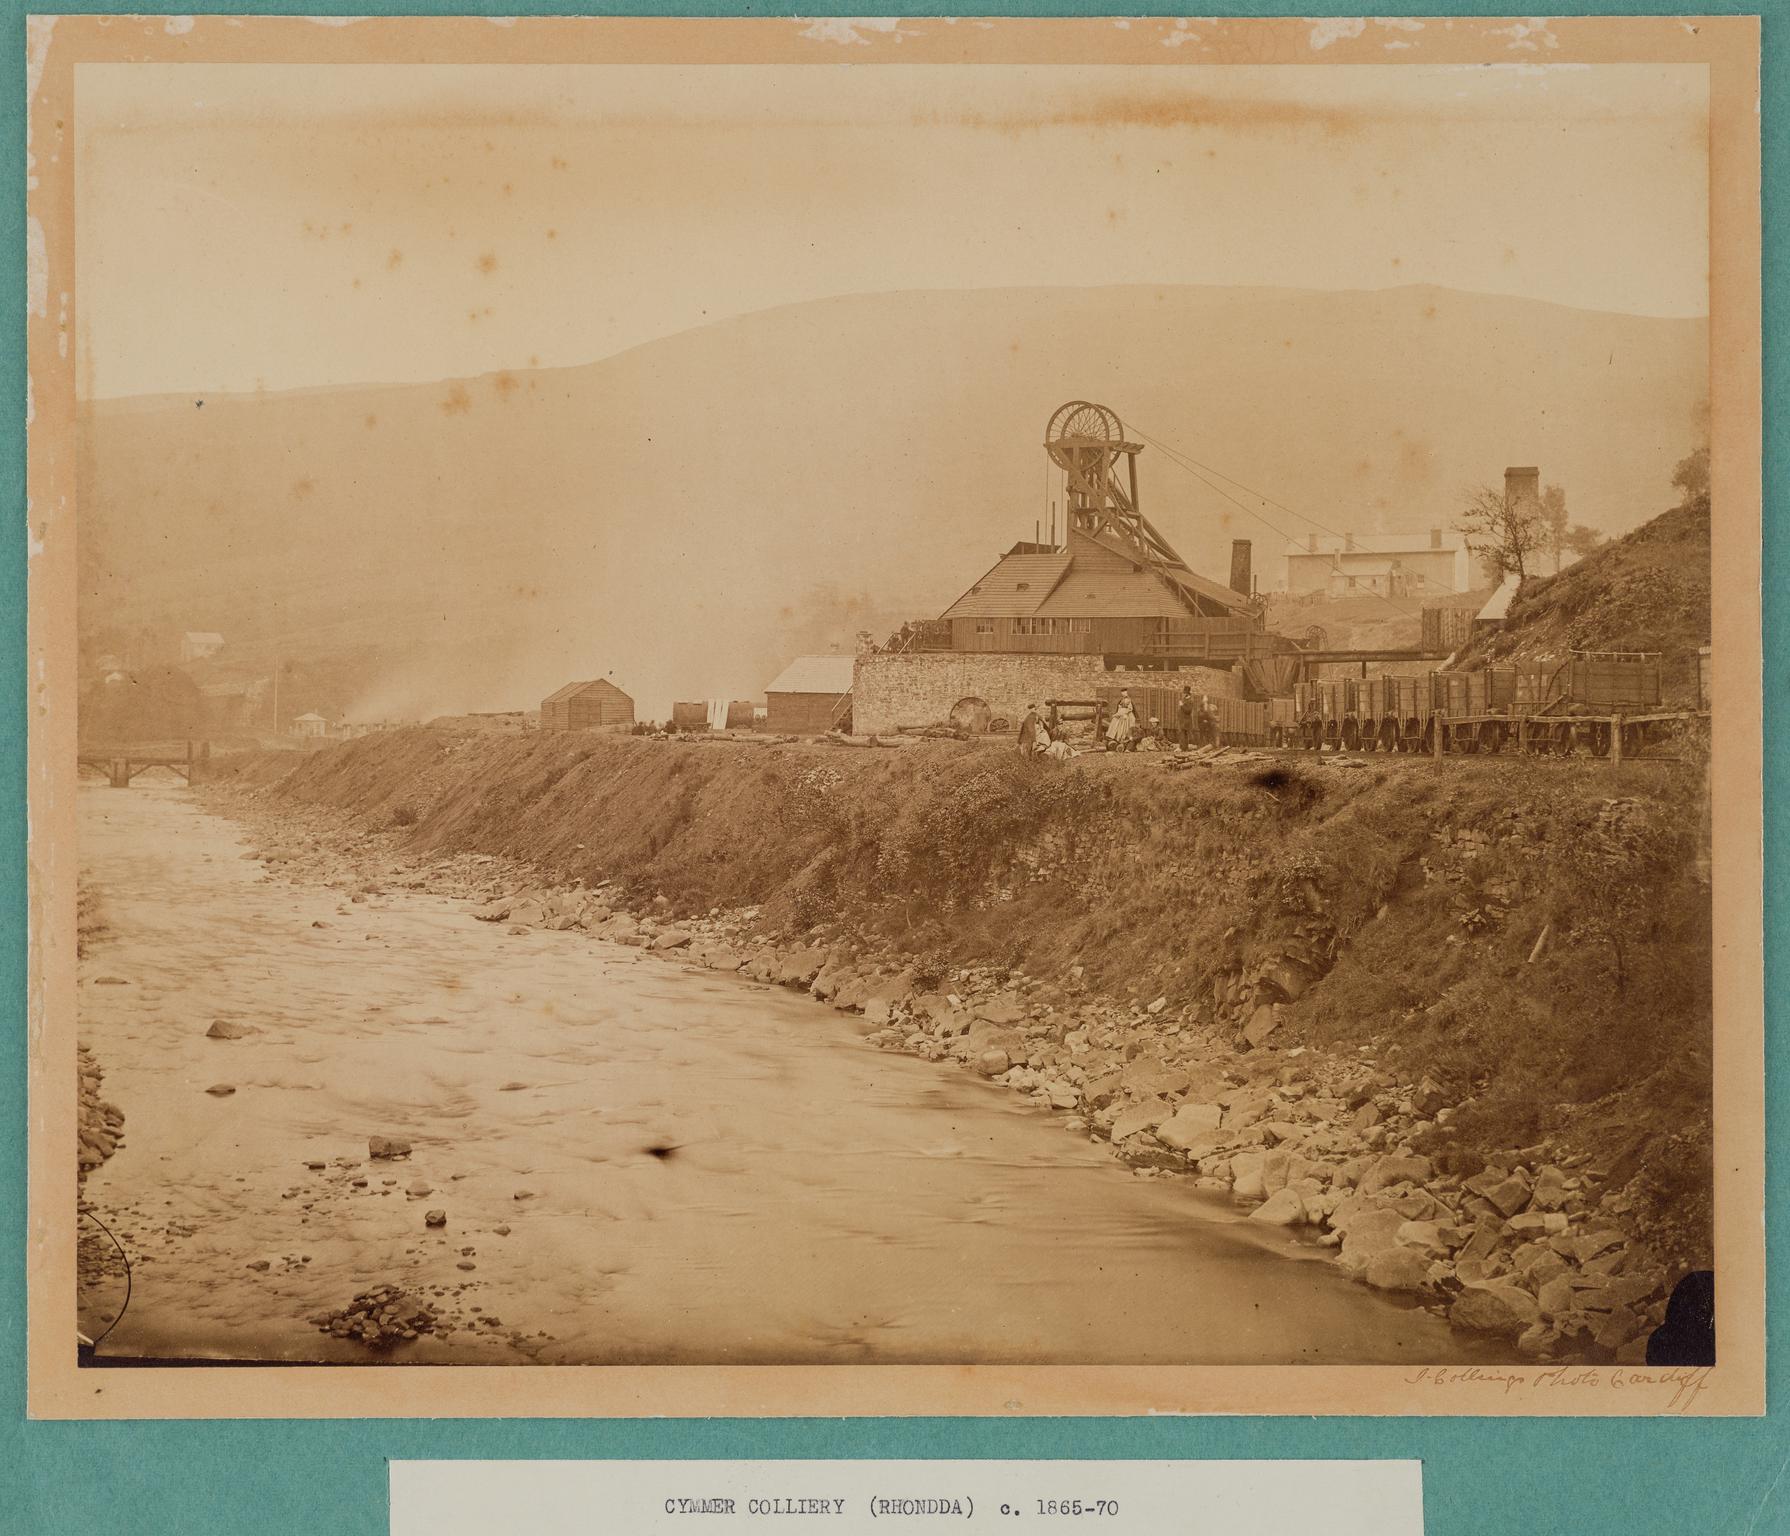 Cymmer Colliery, photograph